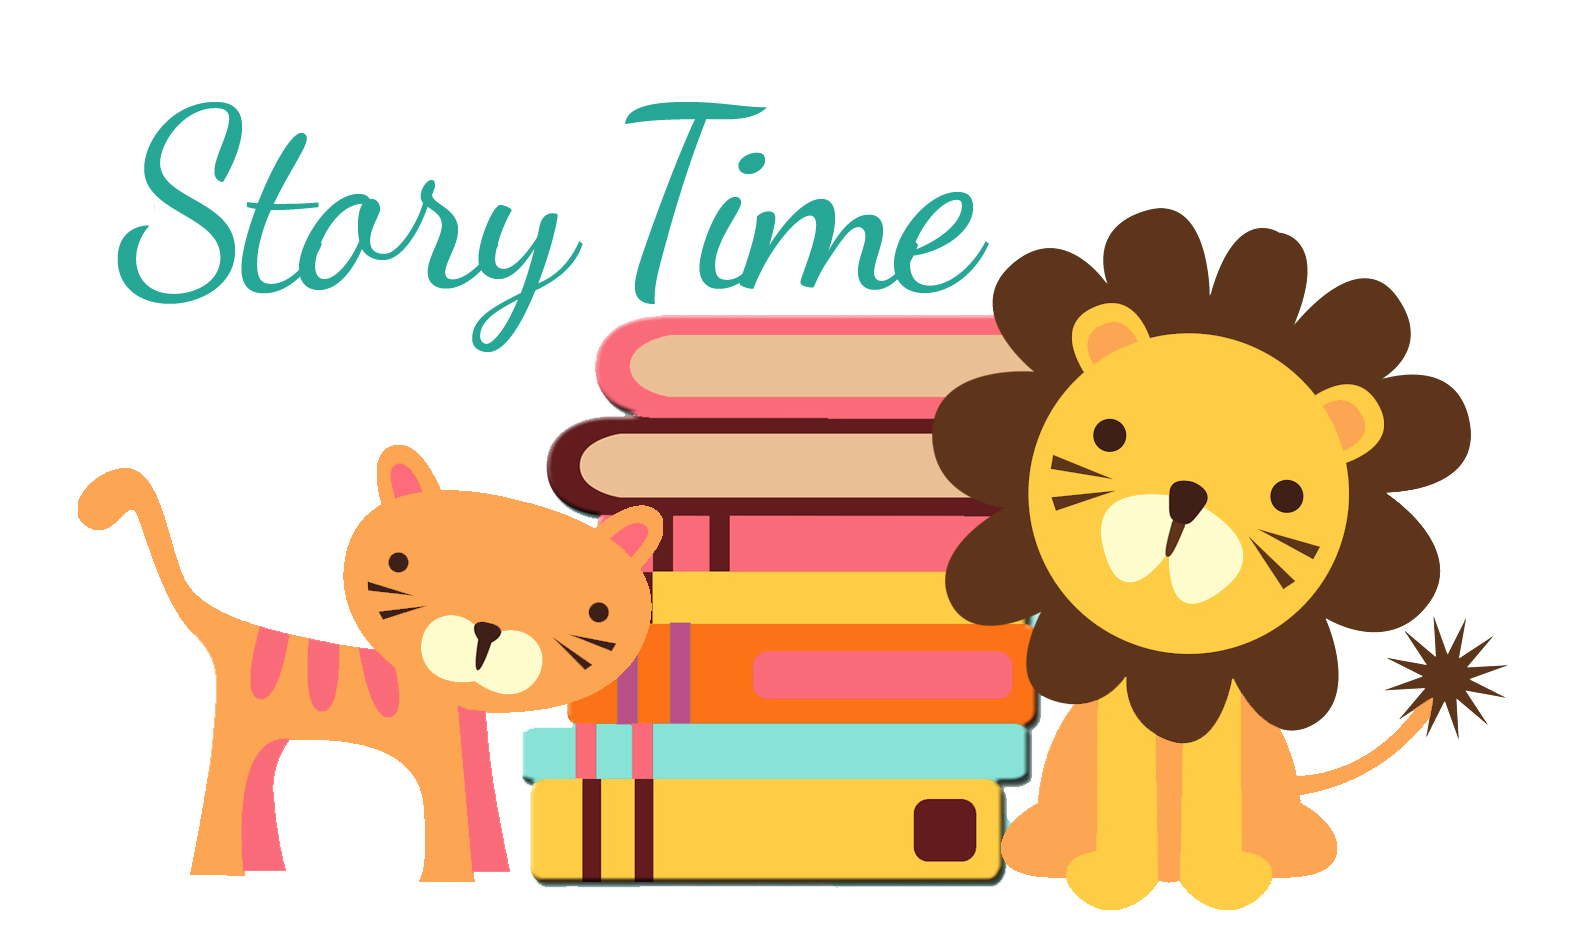 storytime clipart rhyme time